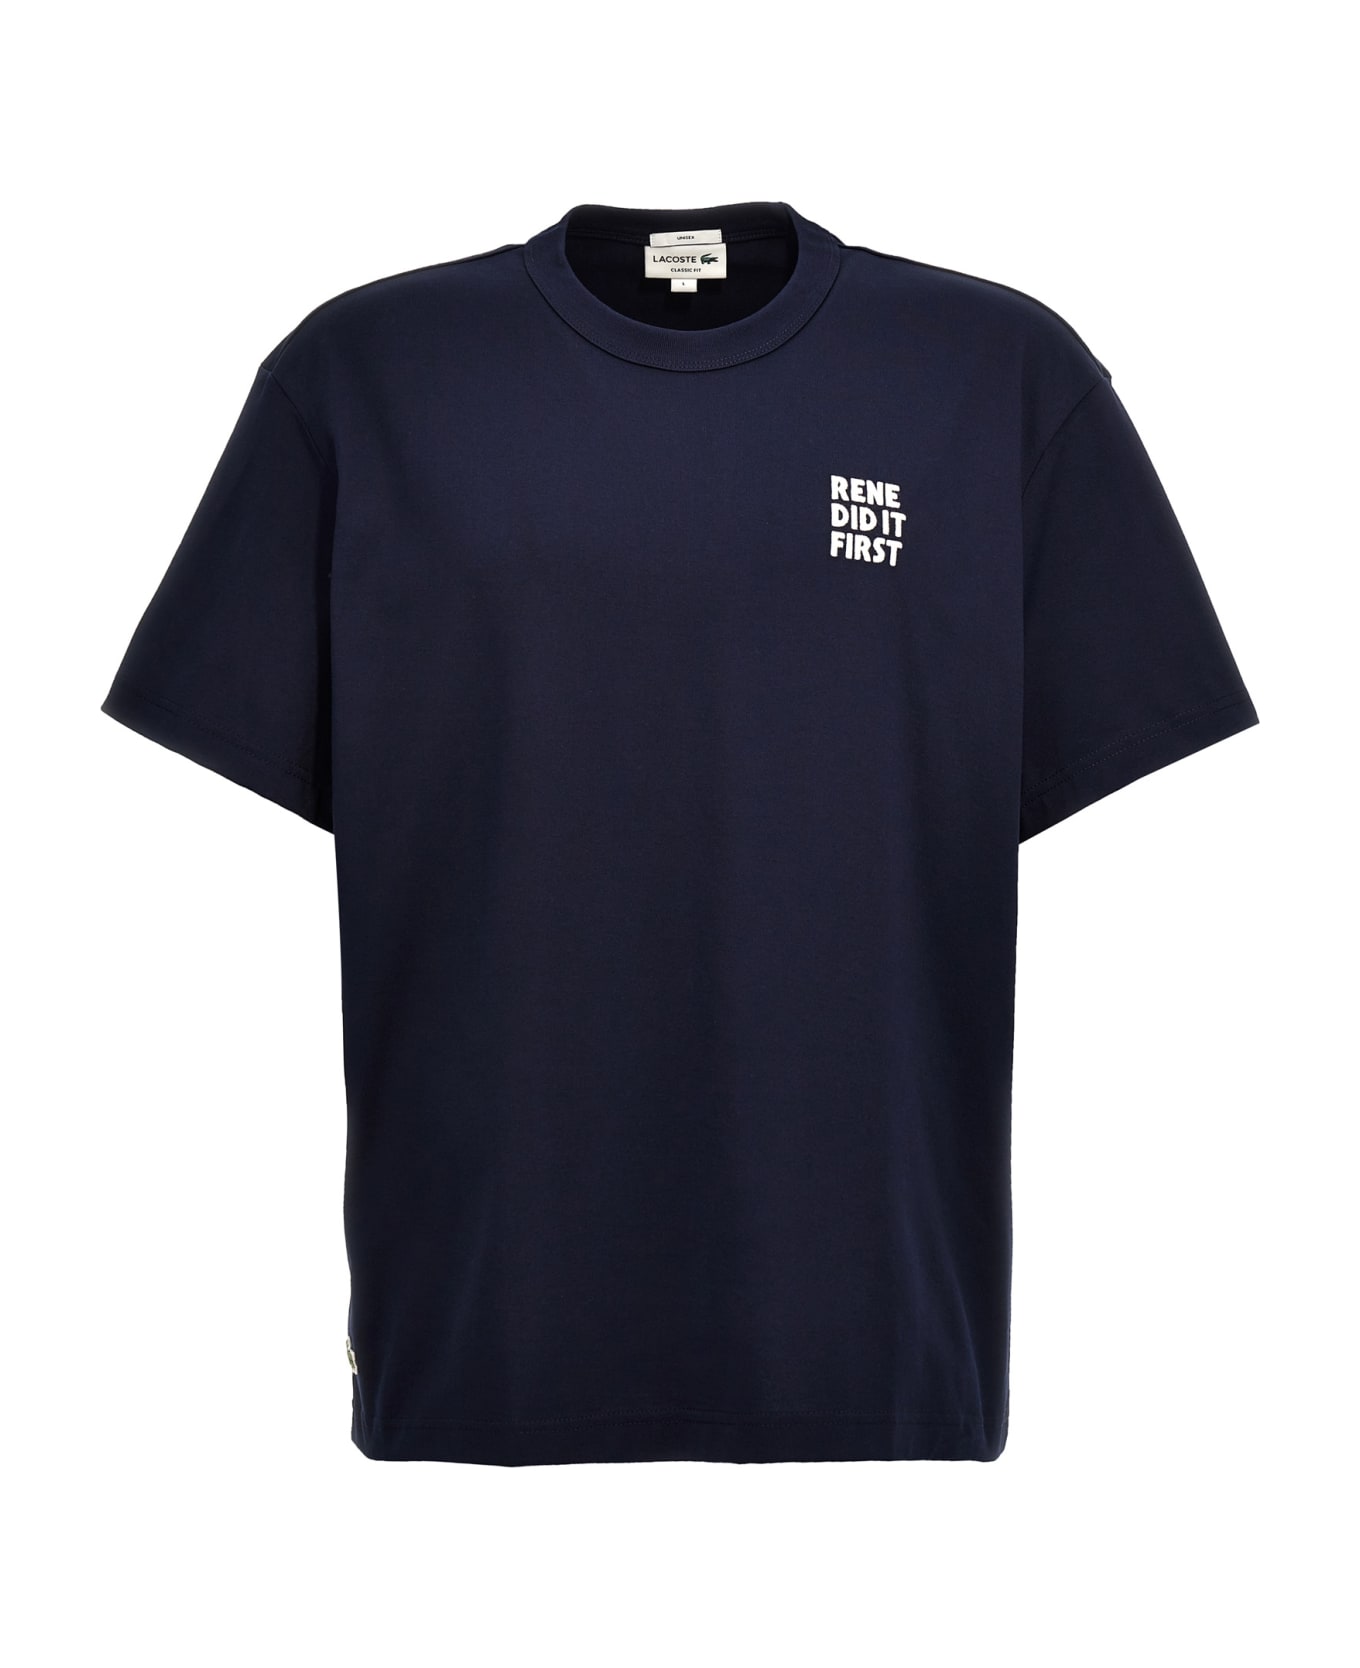 Lacoste 'rene Did It First' T-shirt - Blue